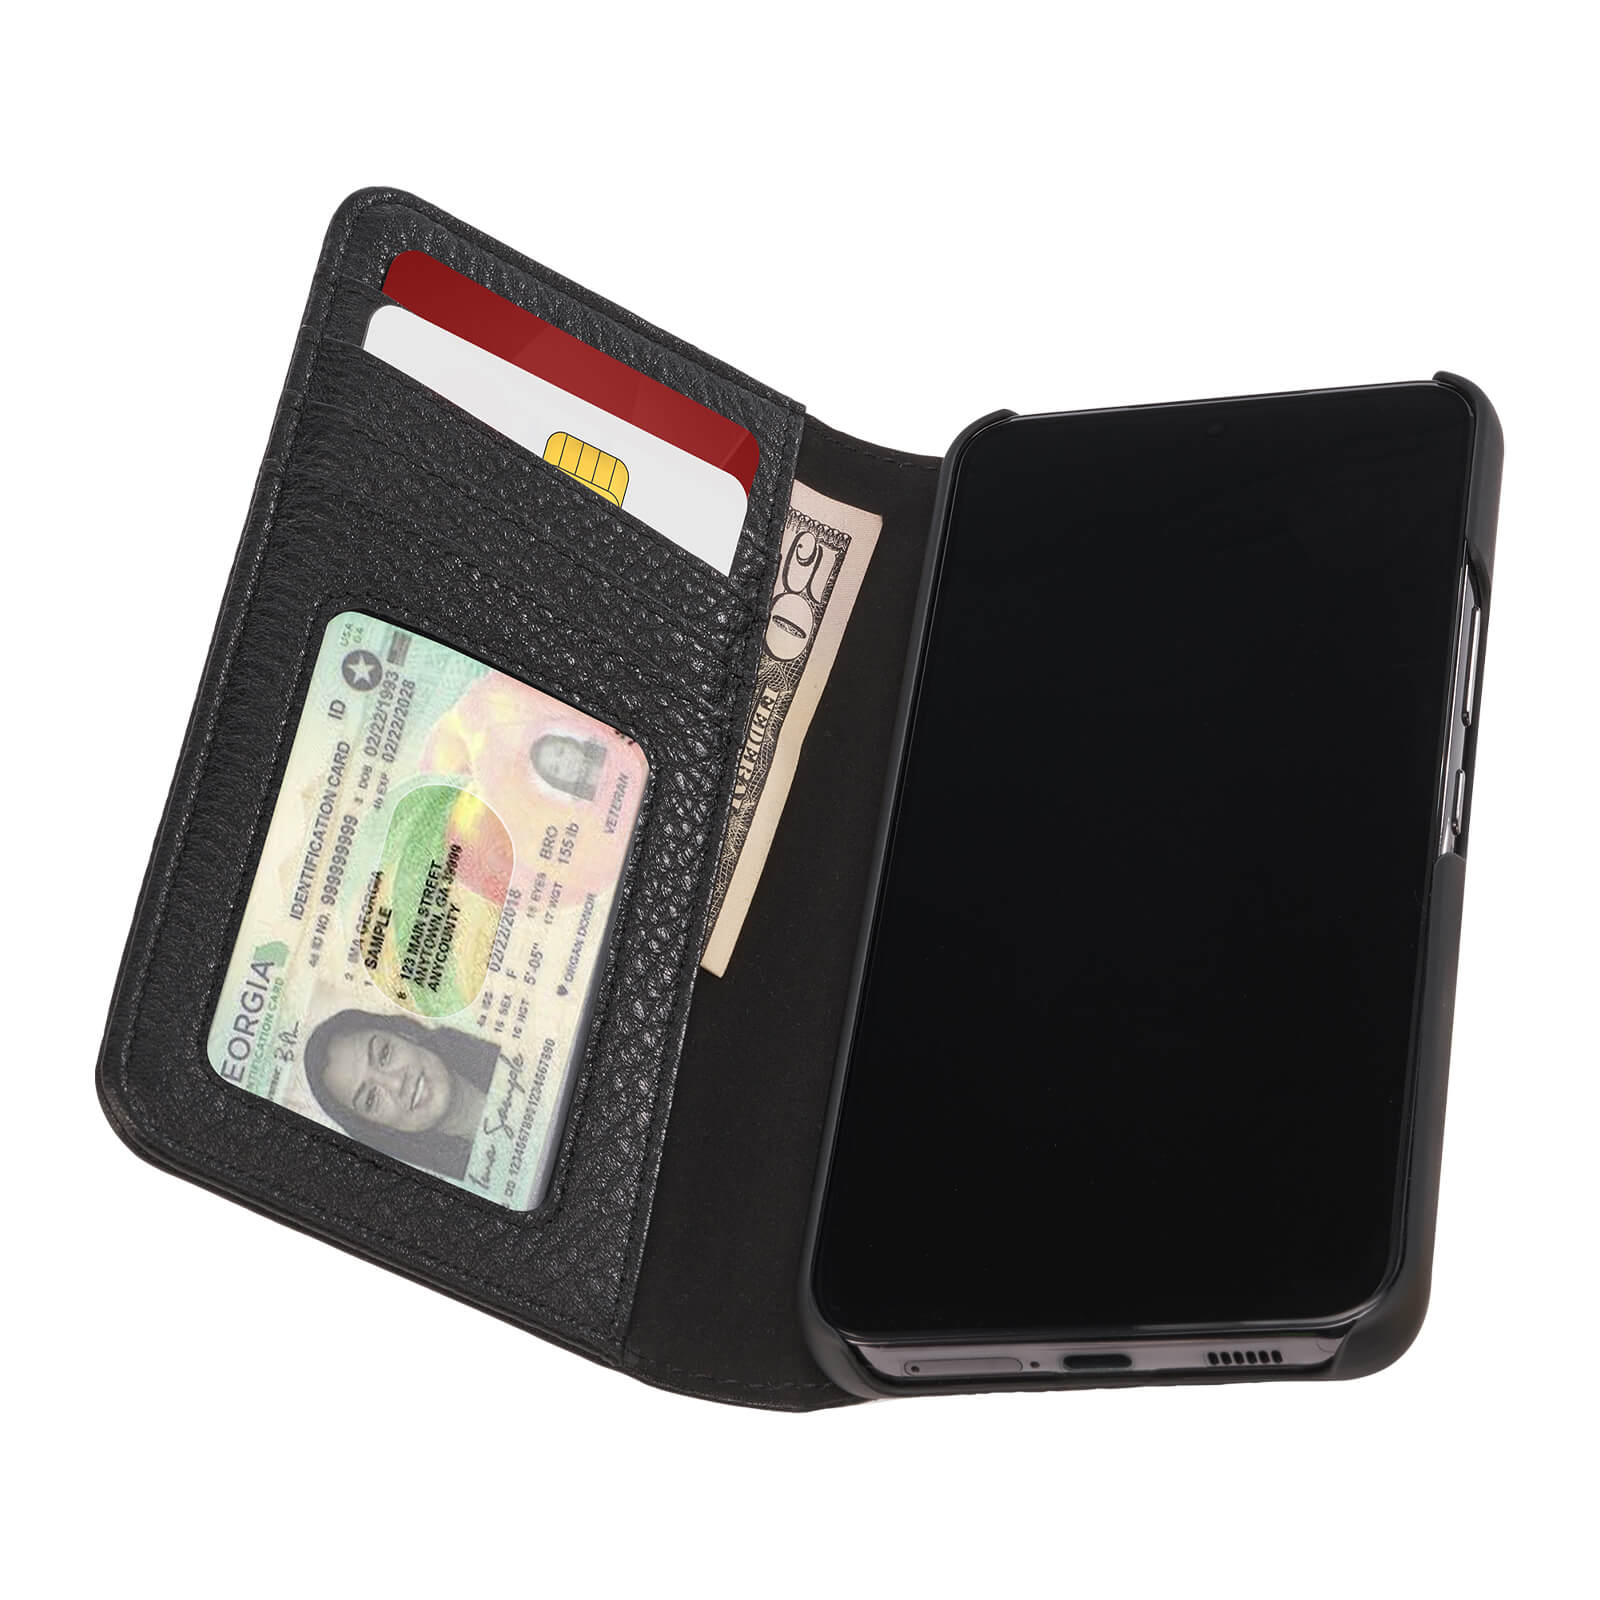 Case holds cards and cash in folio flap. color::Black